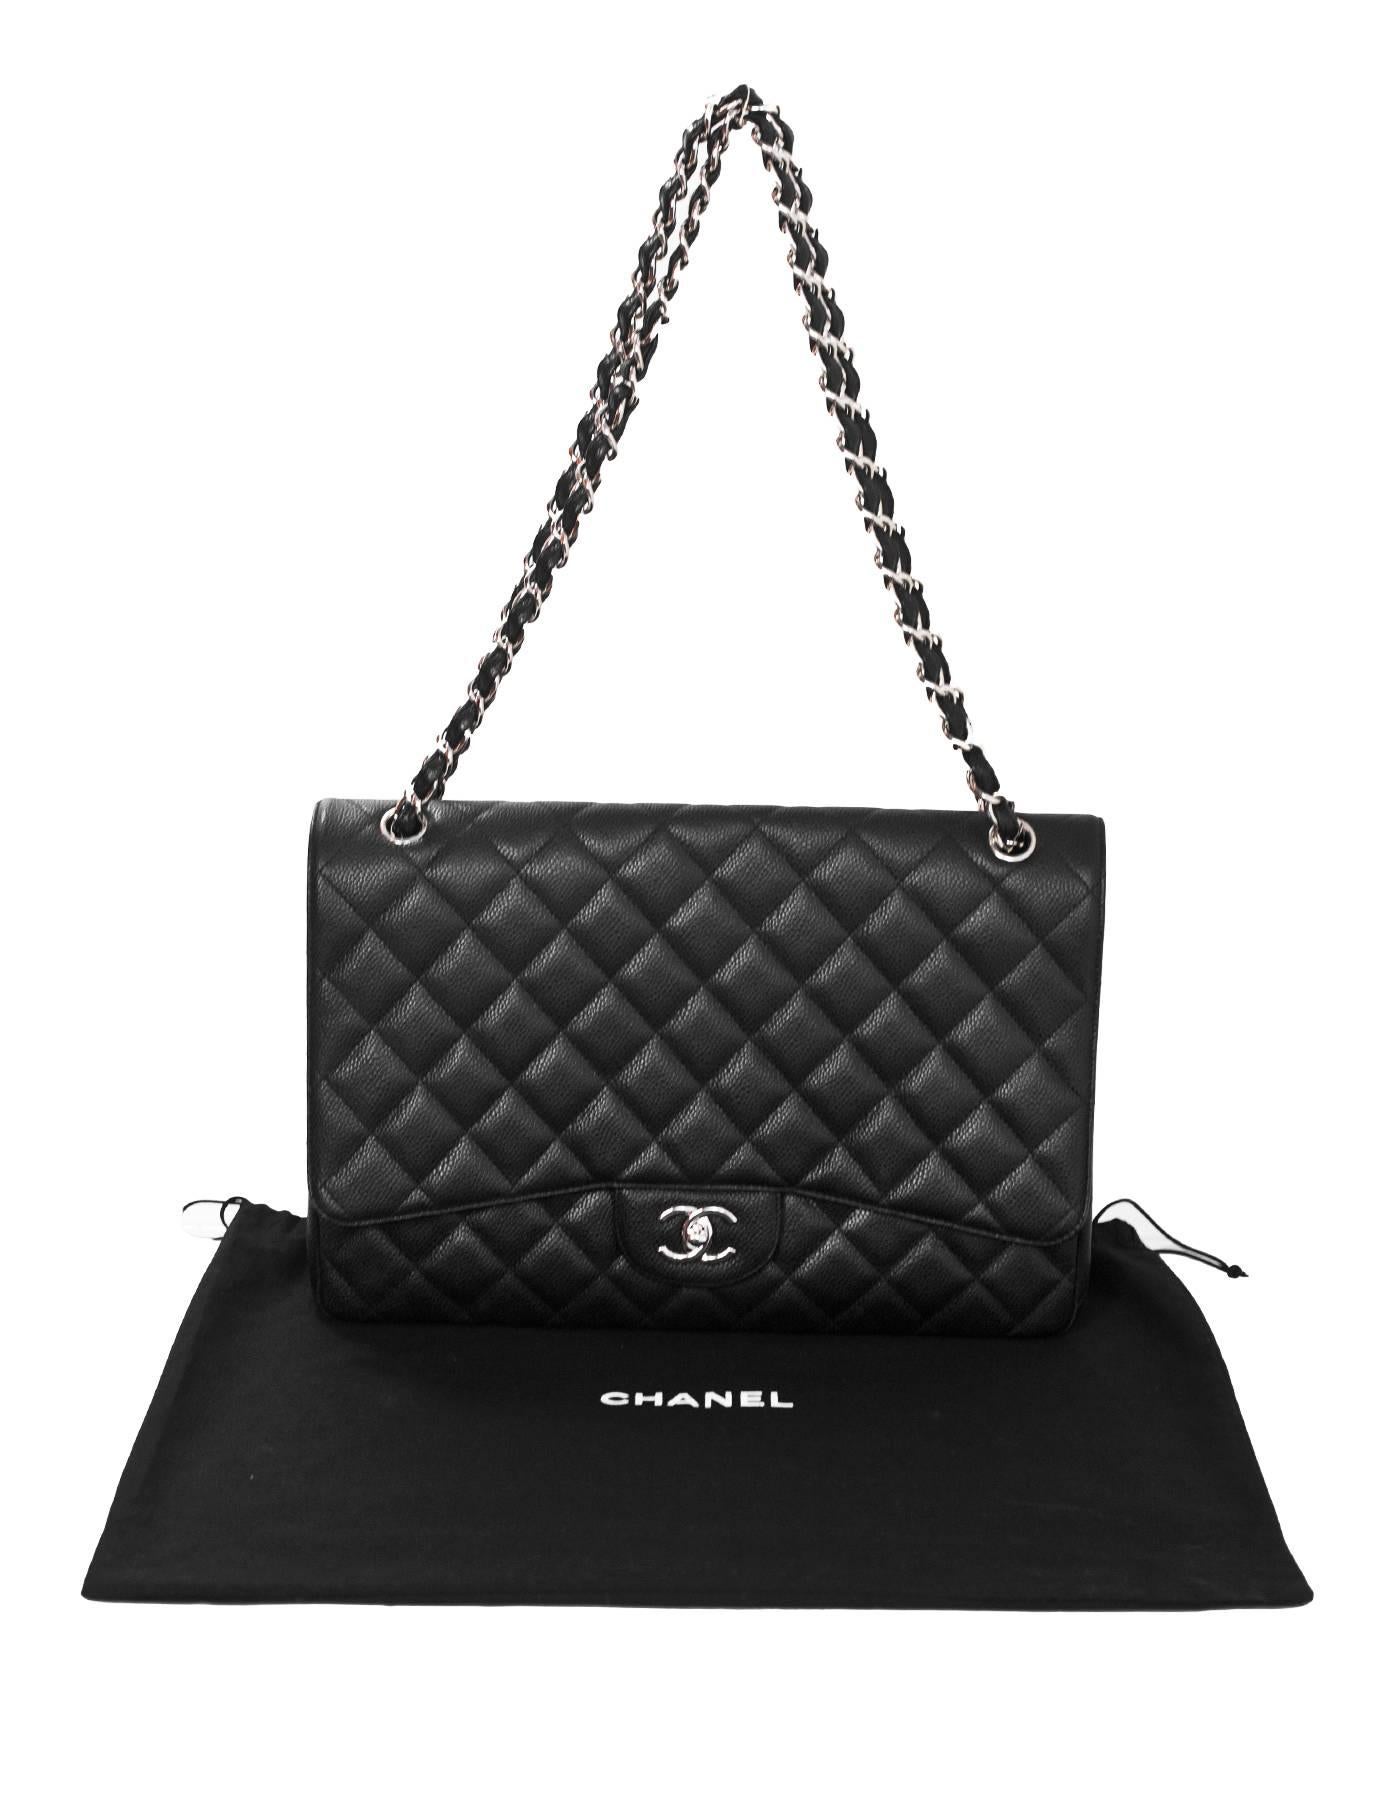 Chanel Black Caviar Leather Quilted Single Flap Maxi Classic Bag with DB 4